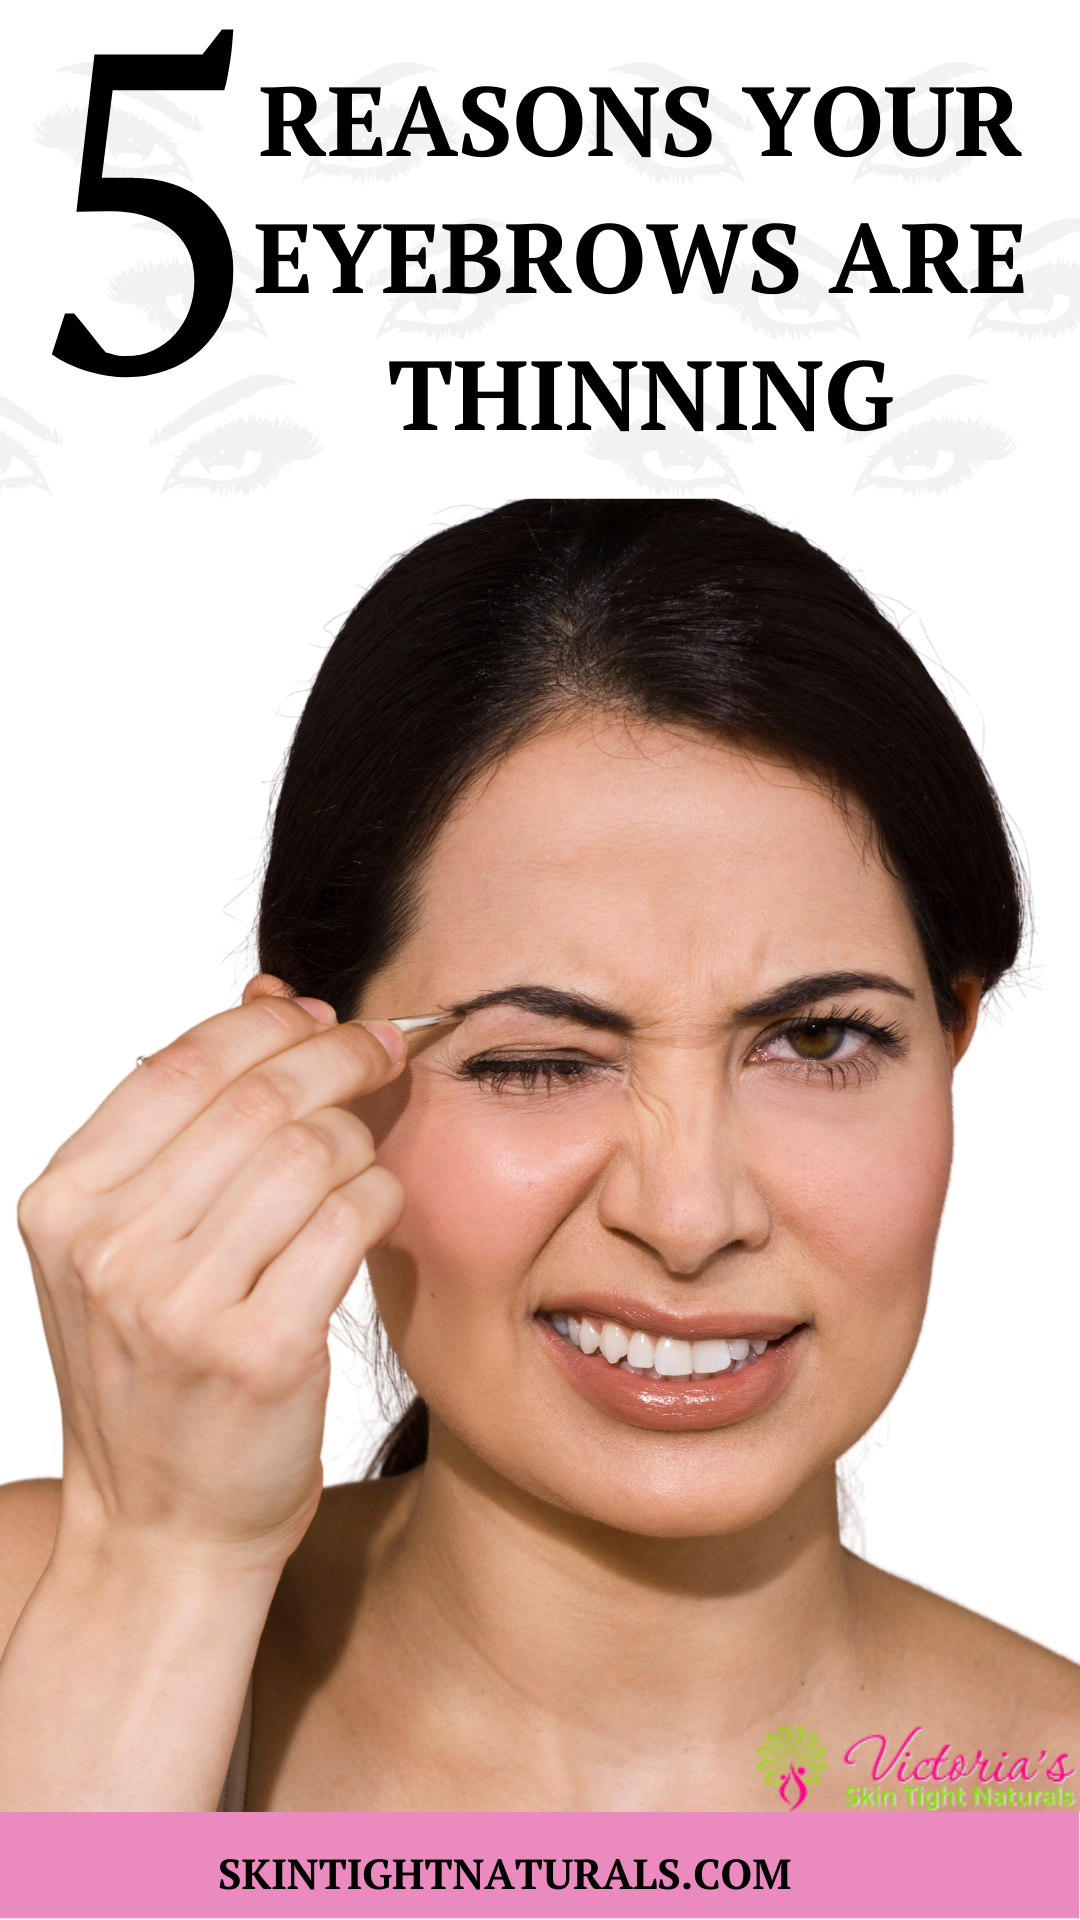 5 Reasons Your Eyebrows Are Thinning